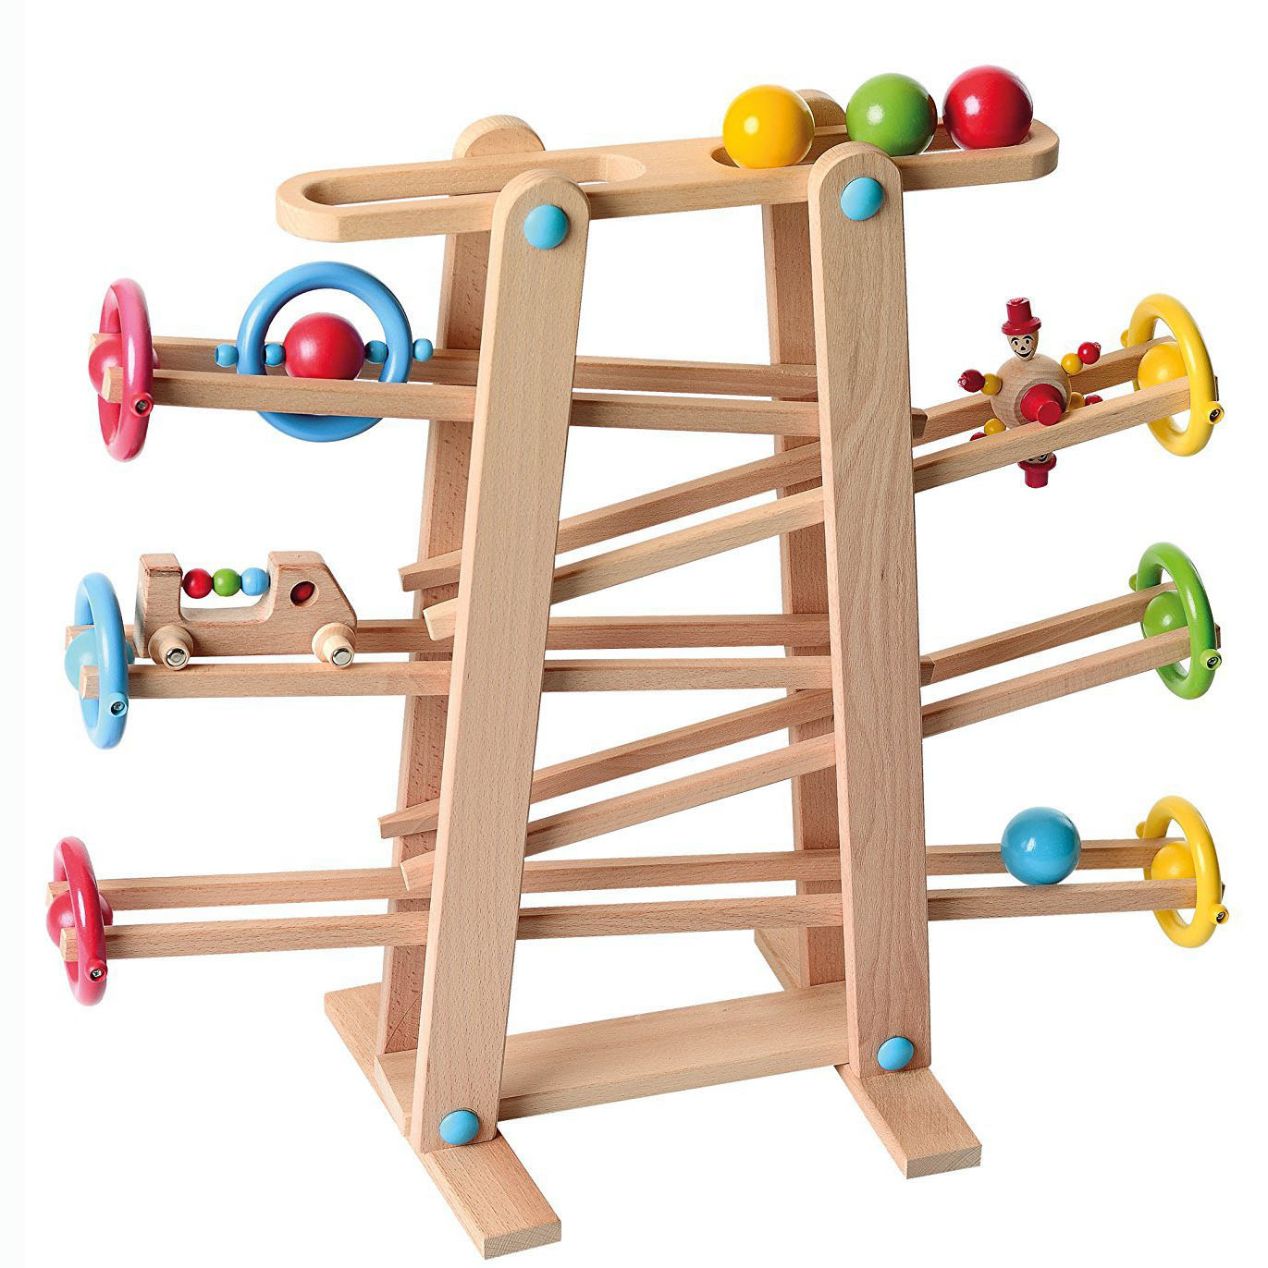 Wooden Toy Ramp, Glider, Ball Drop, Car Track